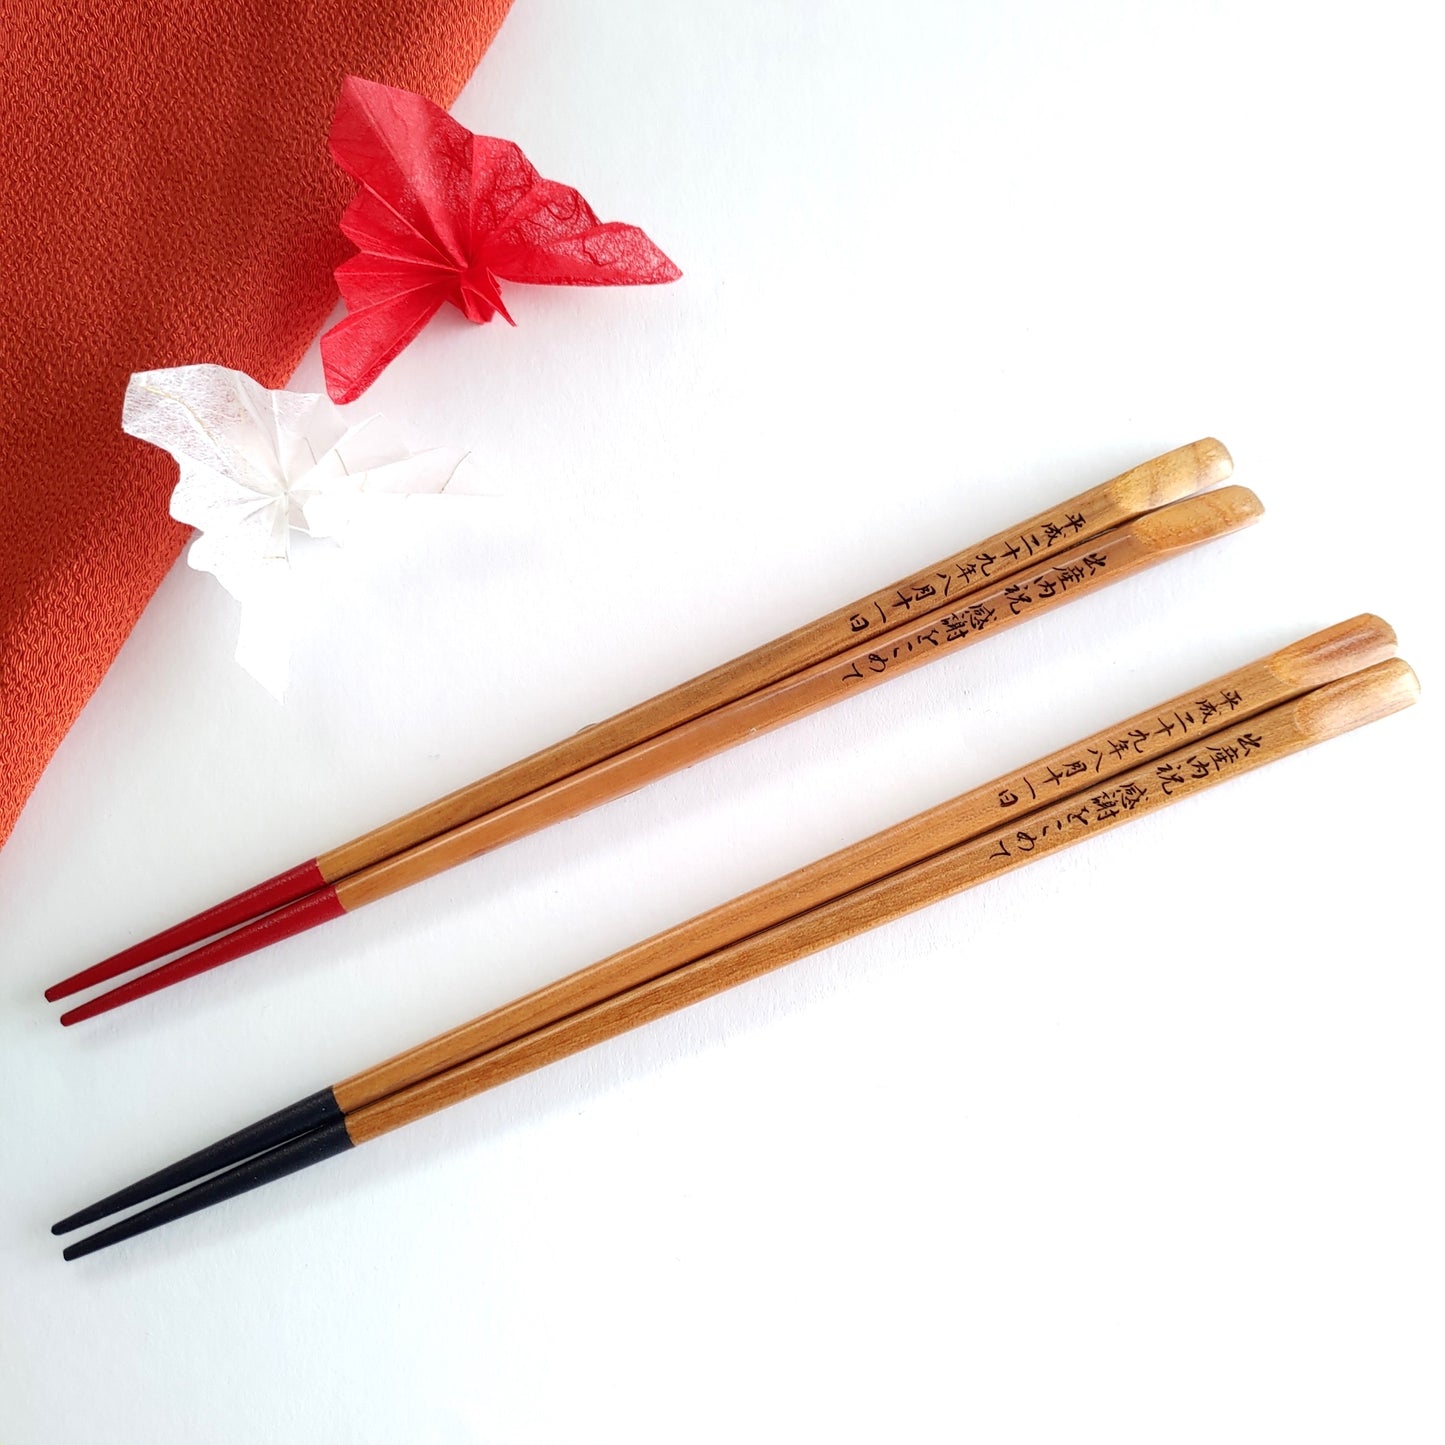 Wood and mountains solid Japanese chopsticks natural - DOUBLE PAIR